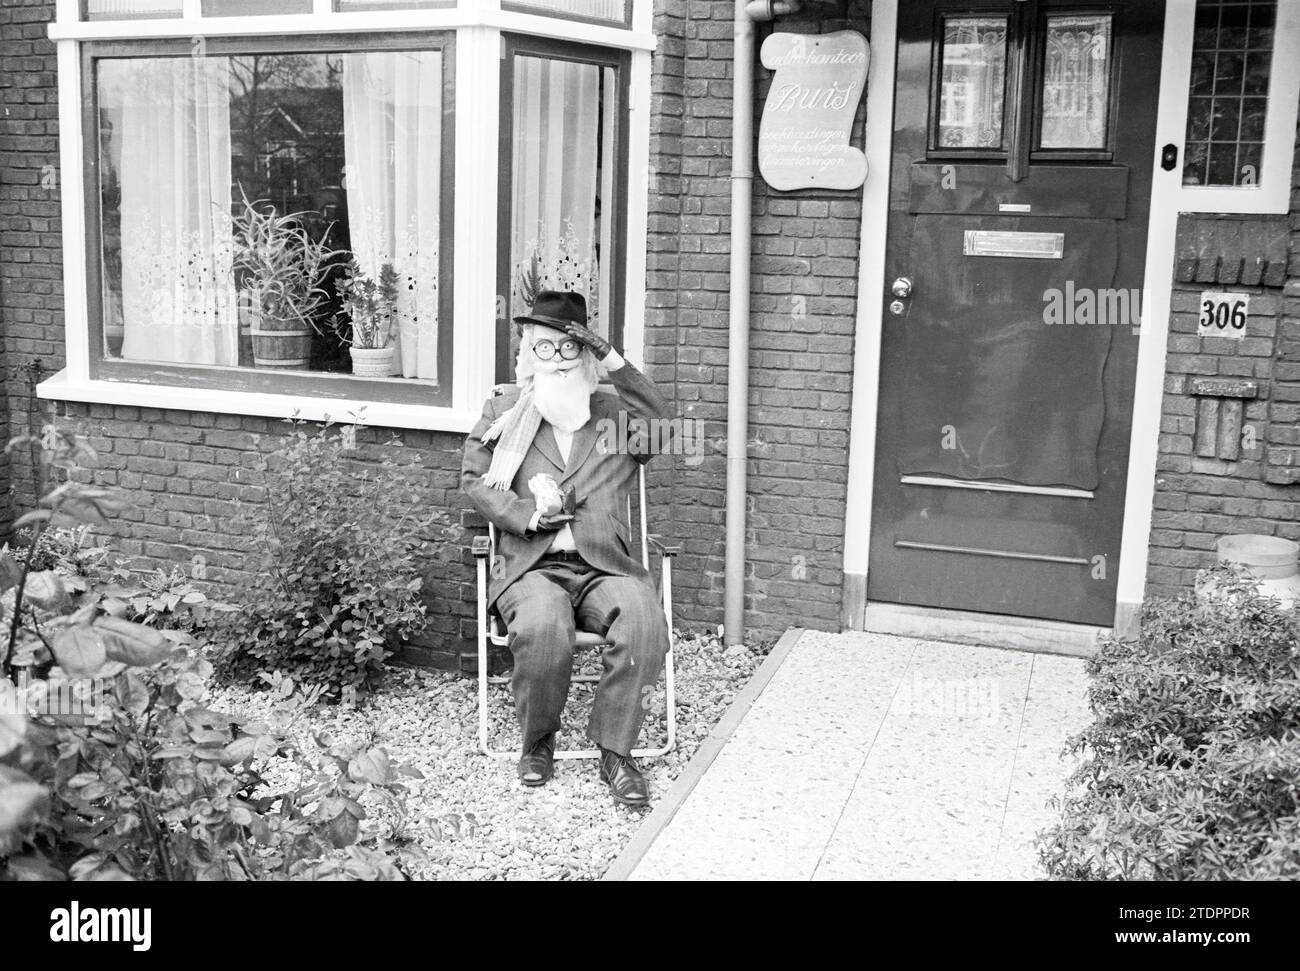 Doll of Abraham in the garden of Leidsevaart 306, on the fiftieth birthday of Mr. Tube, Puppets, puppet shows, puppet shows, puppet theater, Texts, Haarlem, Leidsevaart, The Netherlands, 18-05-1983, Whizgle News from the Past, Tailored for the Future. Explore historical narratives, Dutch The Netherlands agency image with a modern perspective, bridging the gap between yesterday's events and tomorrow's insights. A timeless journey shaping the stories that shape our future Stock Photo